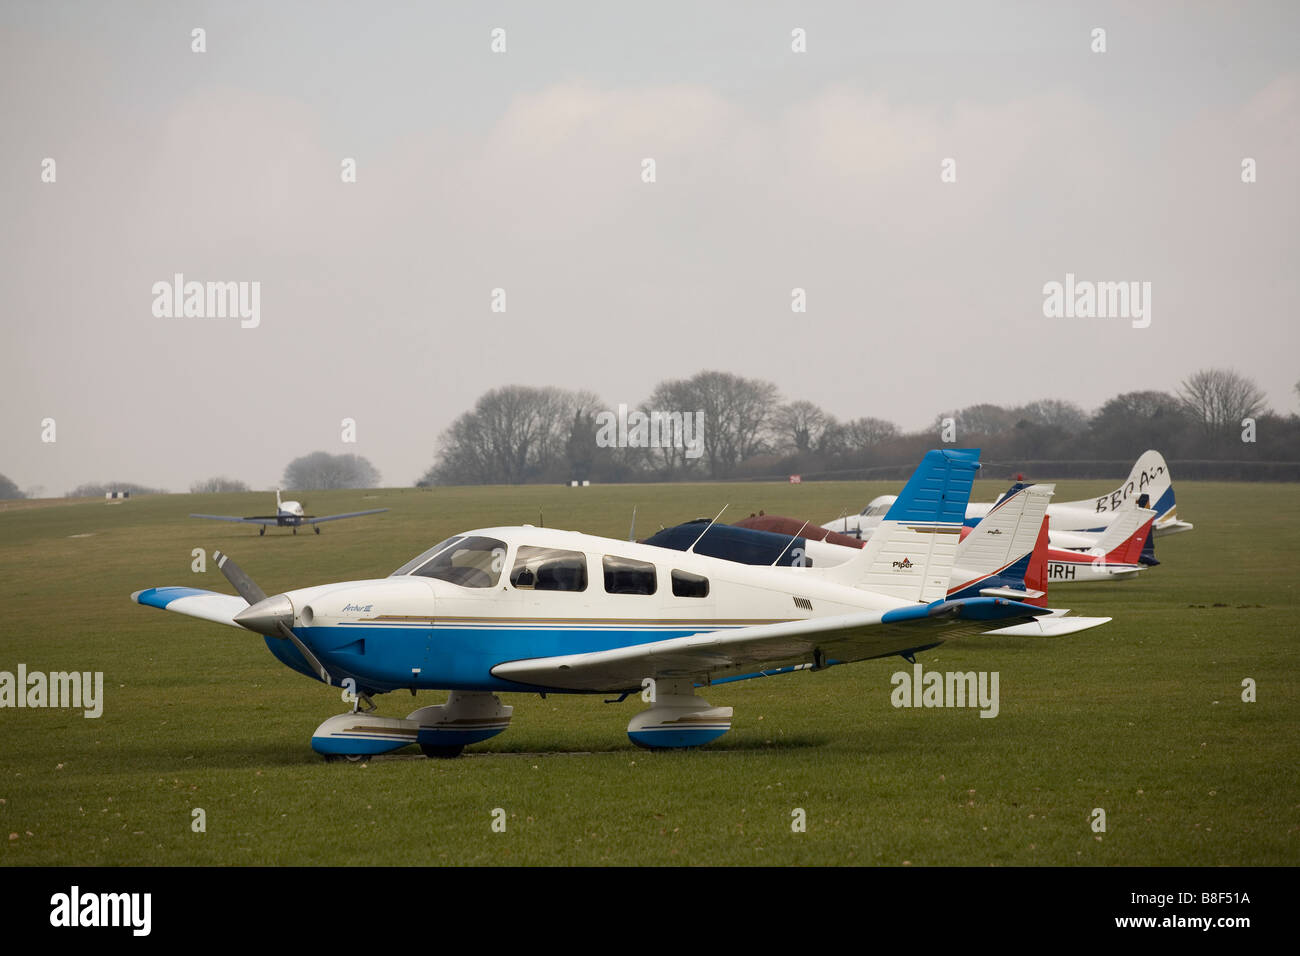 Airfield Airplane Flying Plane Planes Propeller Uk Stock Photo